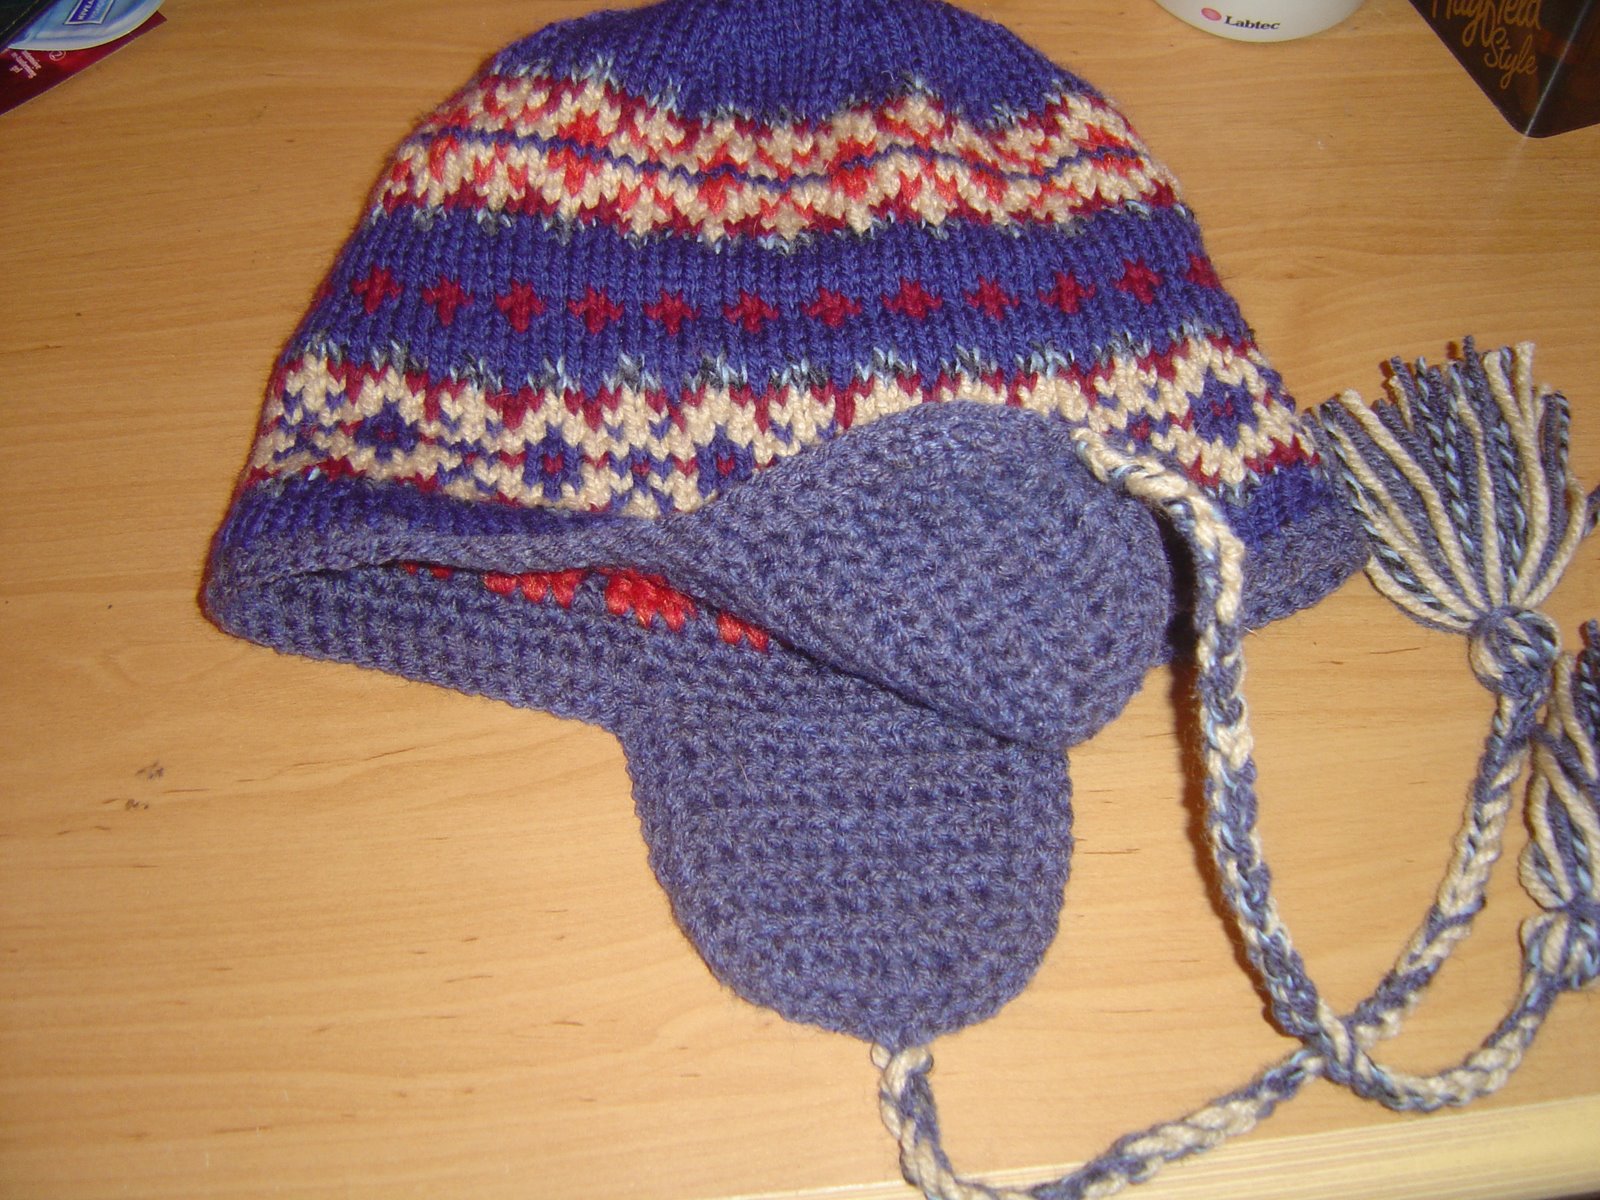 [My+reversible+hat+showing+knitted+side.JPG]